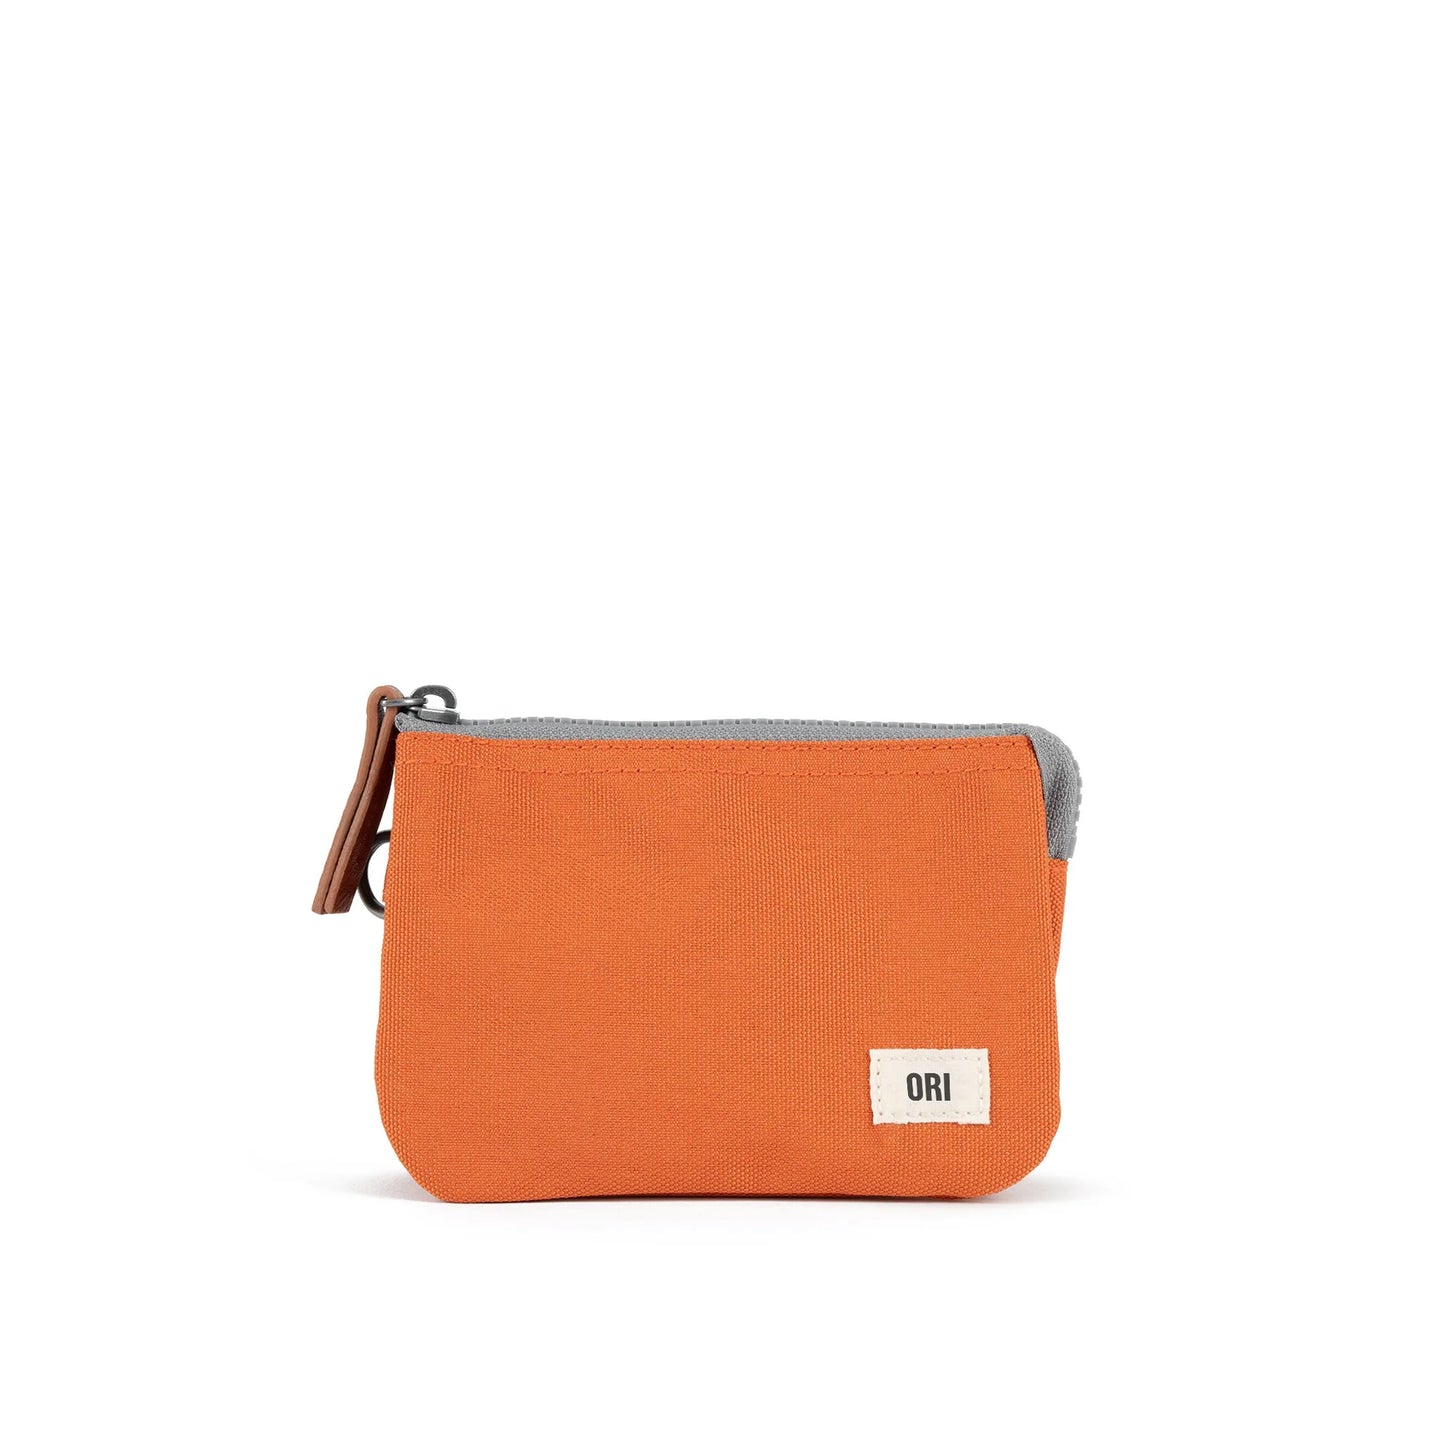 Carnaby Sustainable Atomic Orange (Canvas) - Small